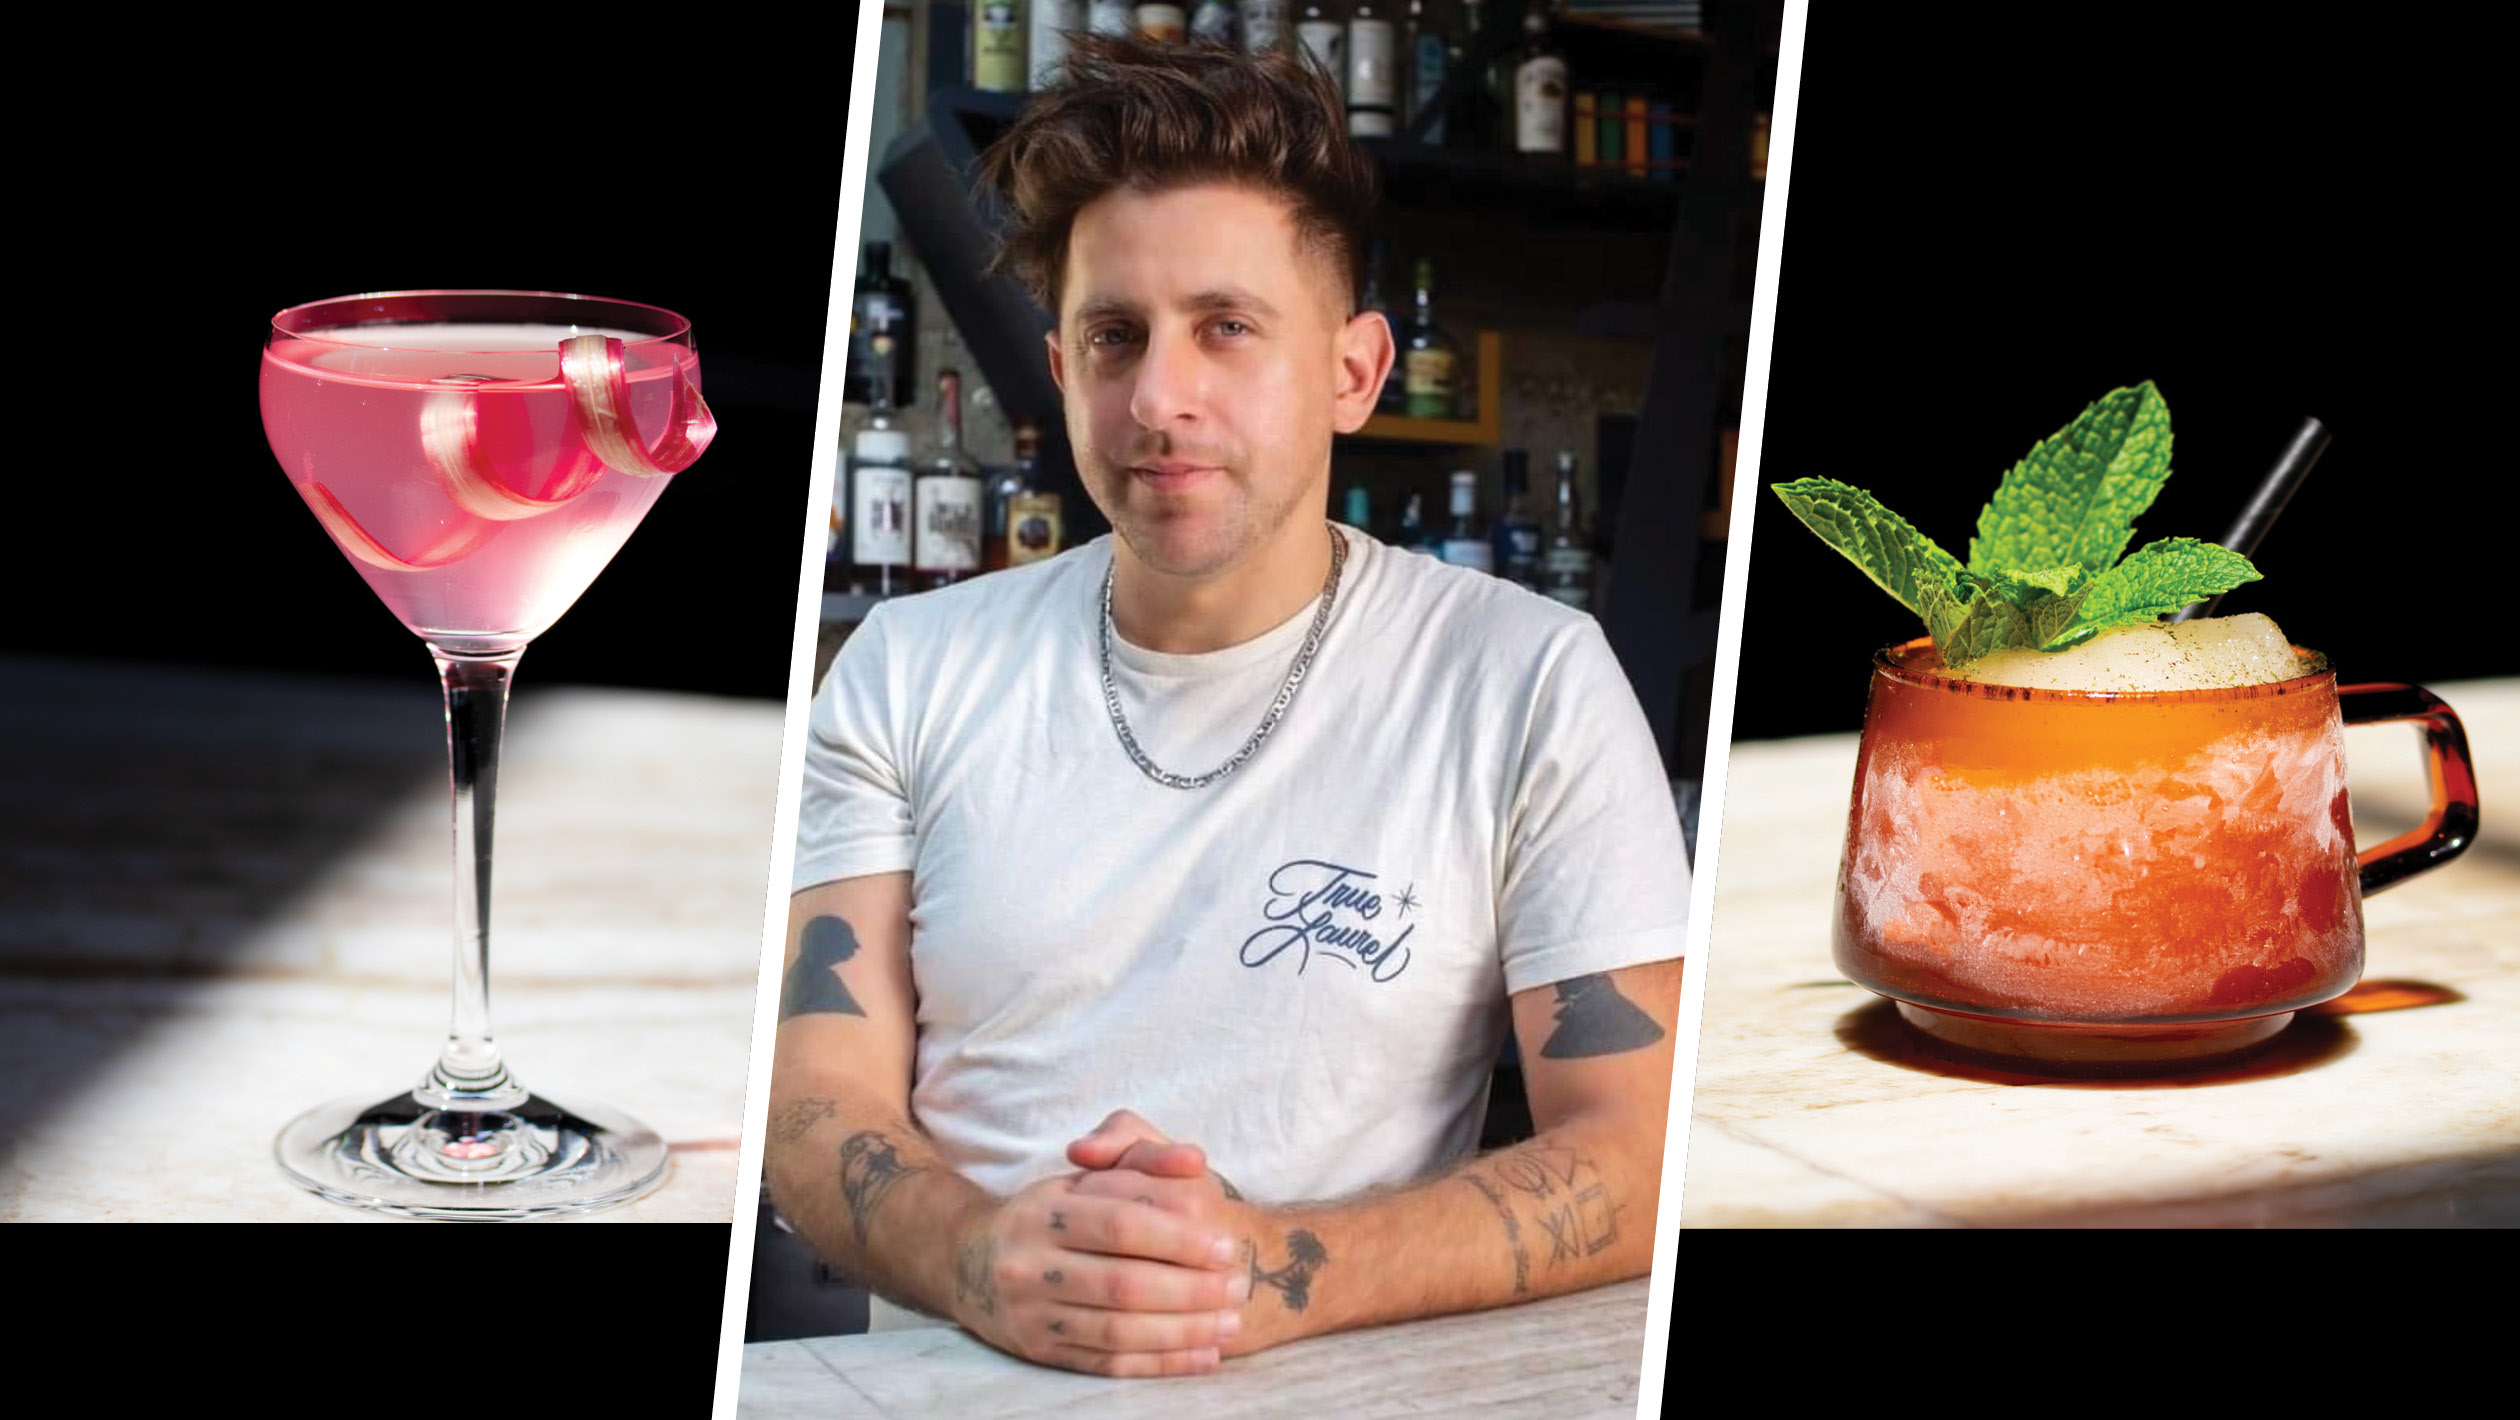 From left to right: the Barbie Girl; Nicolas Torres, the bar director of San Francisco’s True Laurel; the Westside Southside.